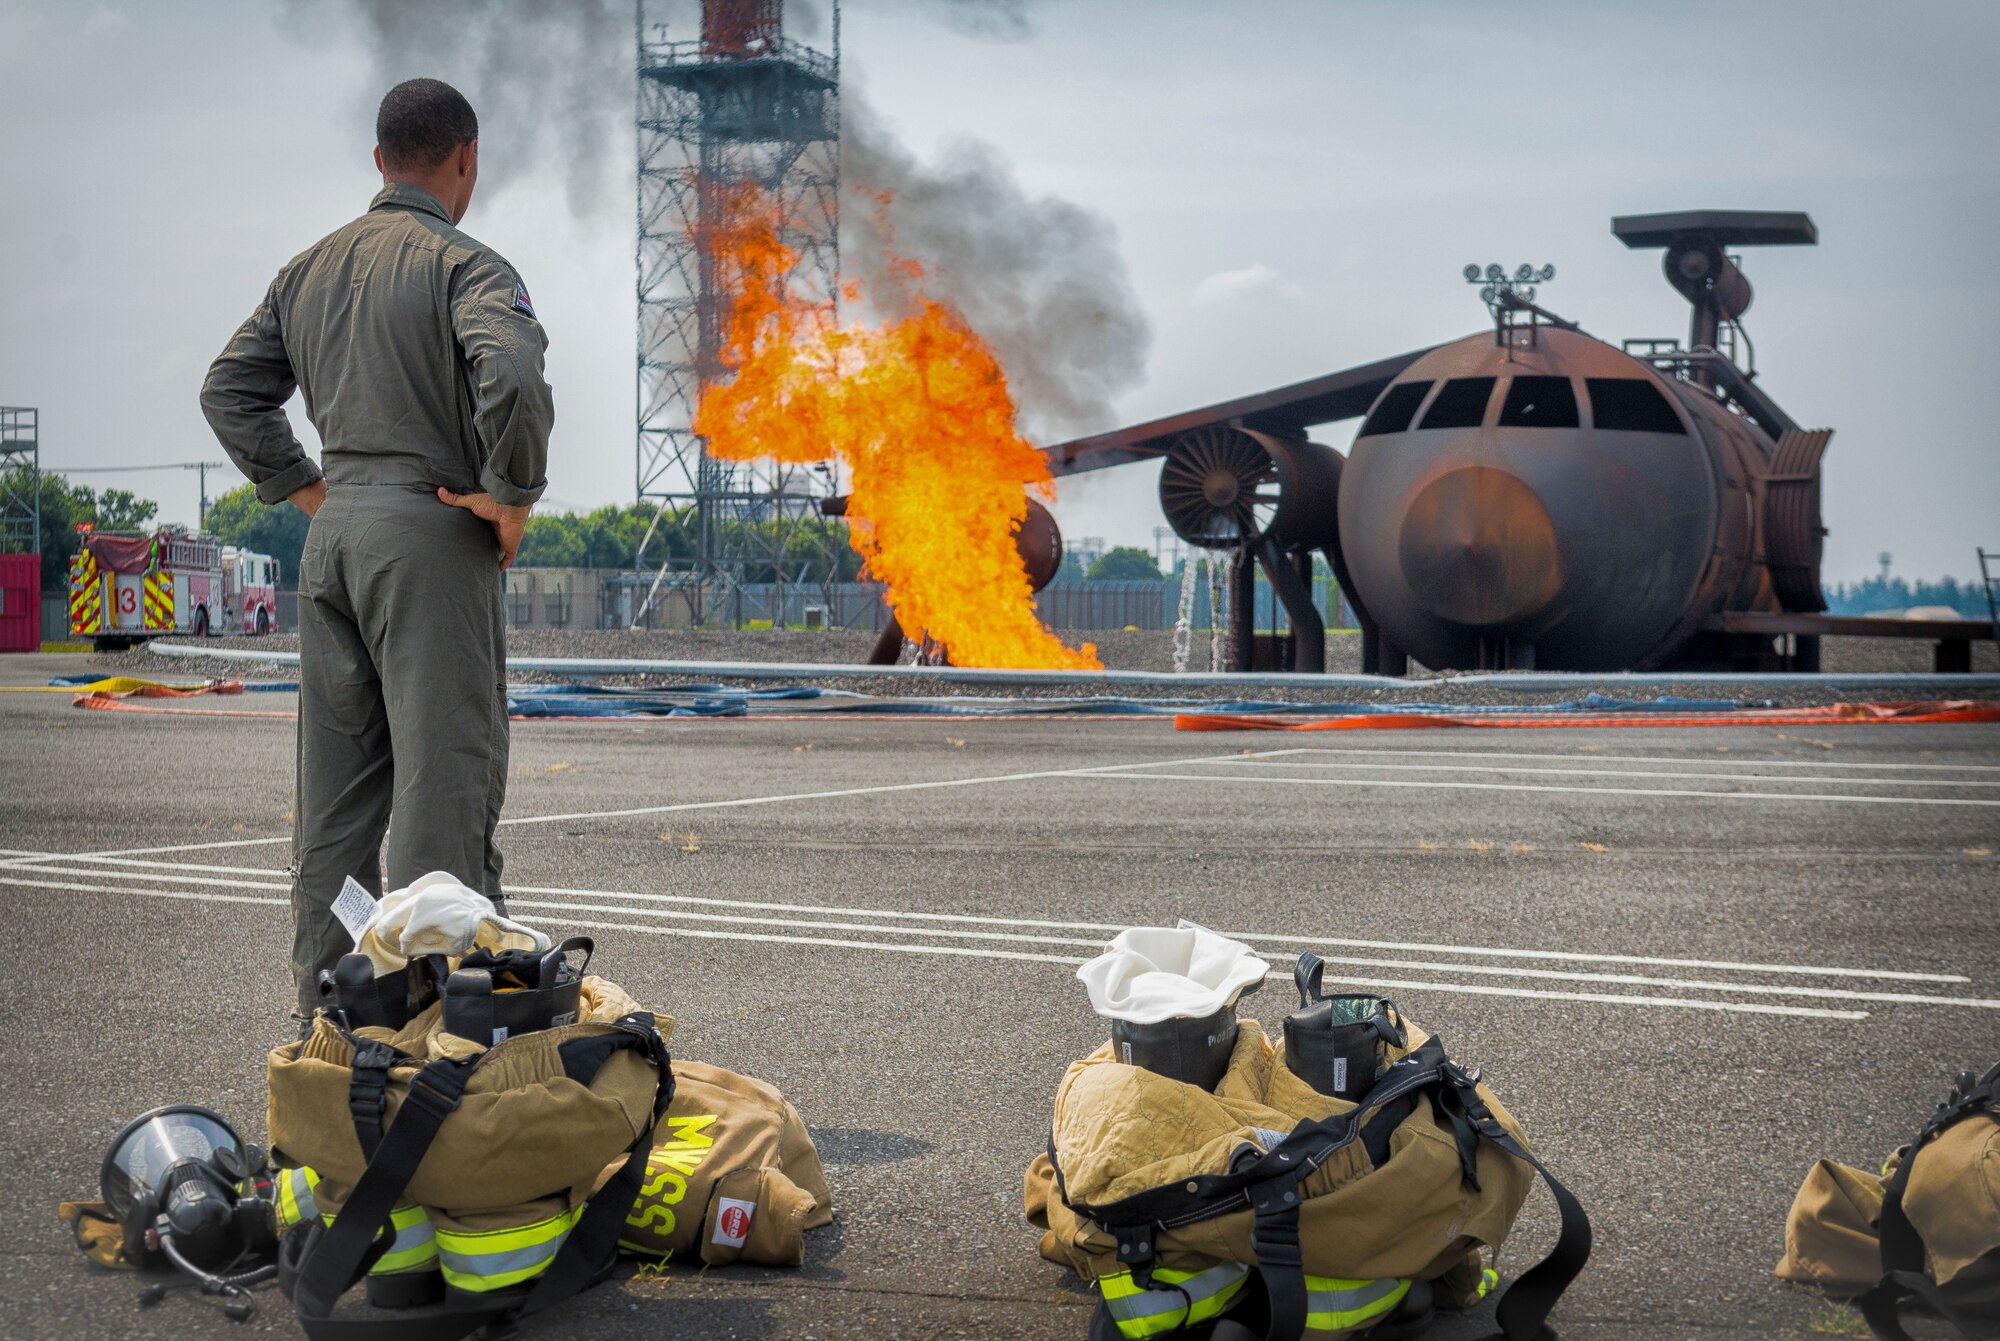 Lance Cpl. Christian Cozart, Marine Wing Support Squadron 171 Aircraft Rescue and Fire-Fighting specialist, watches a simulated aircraft burn